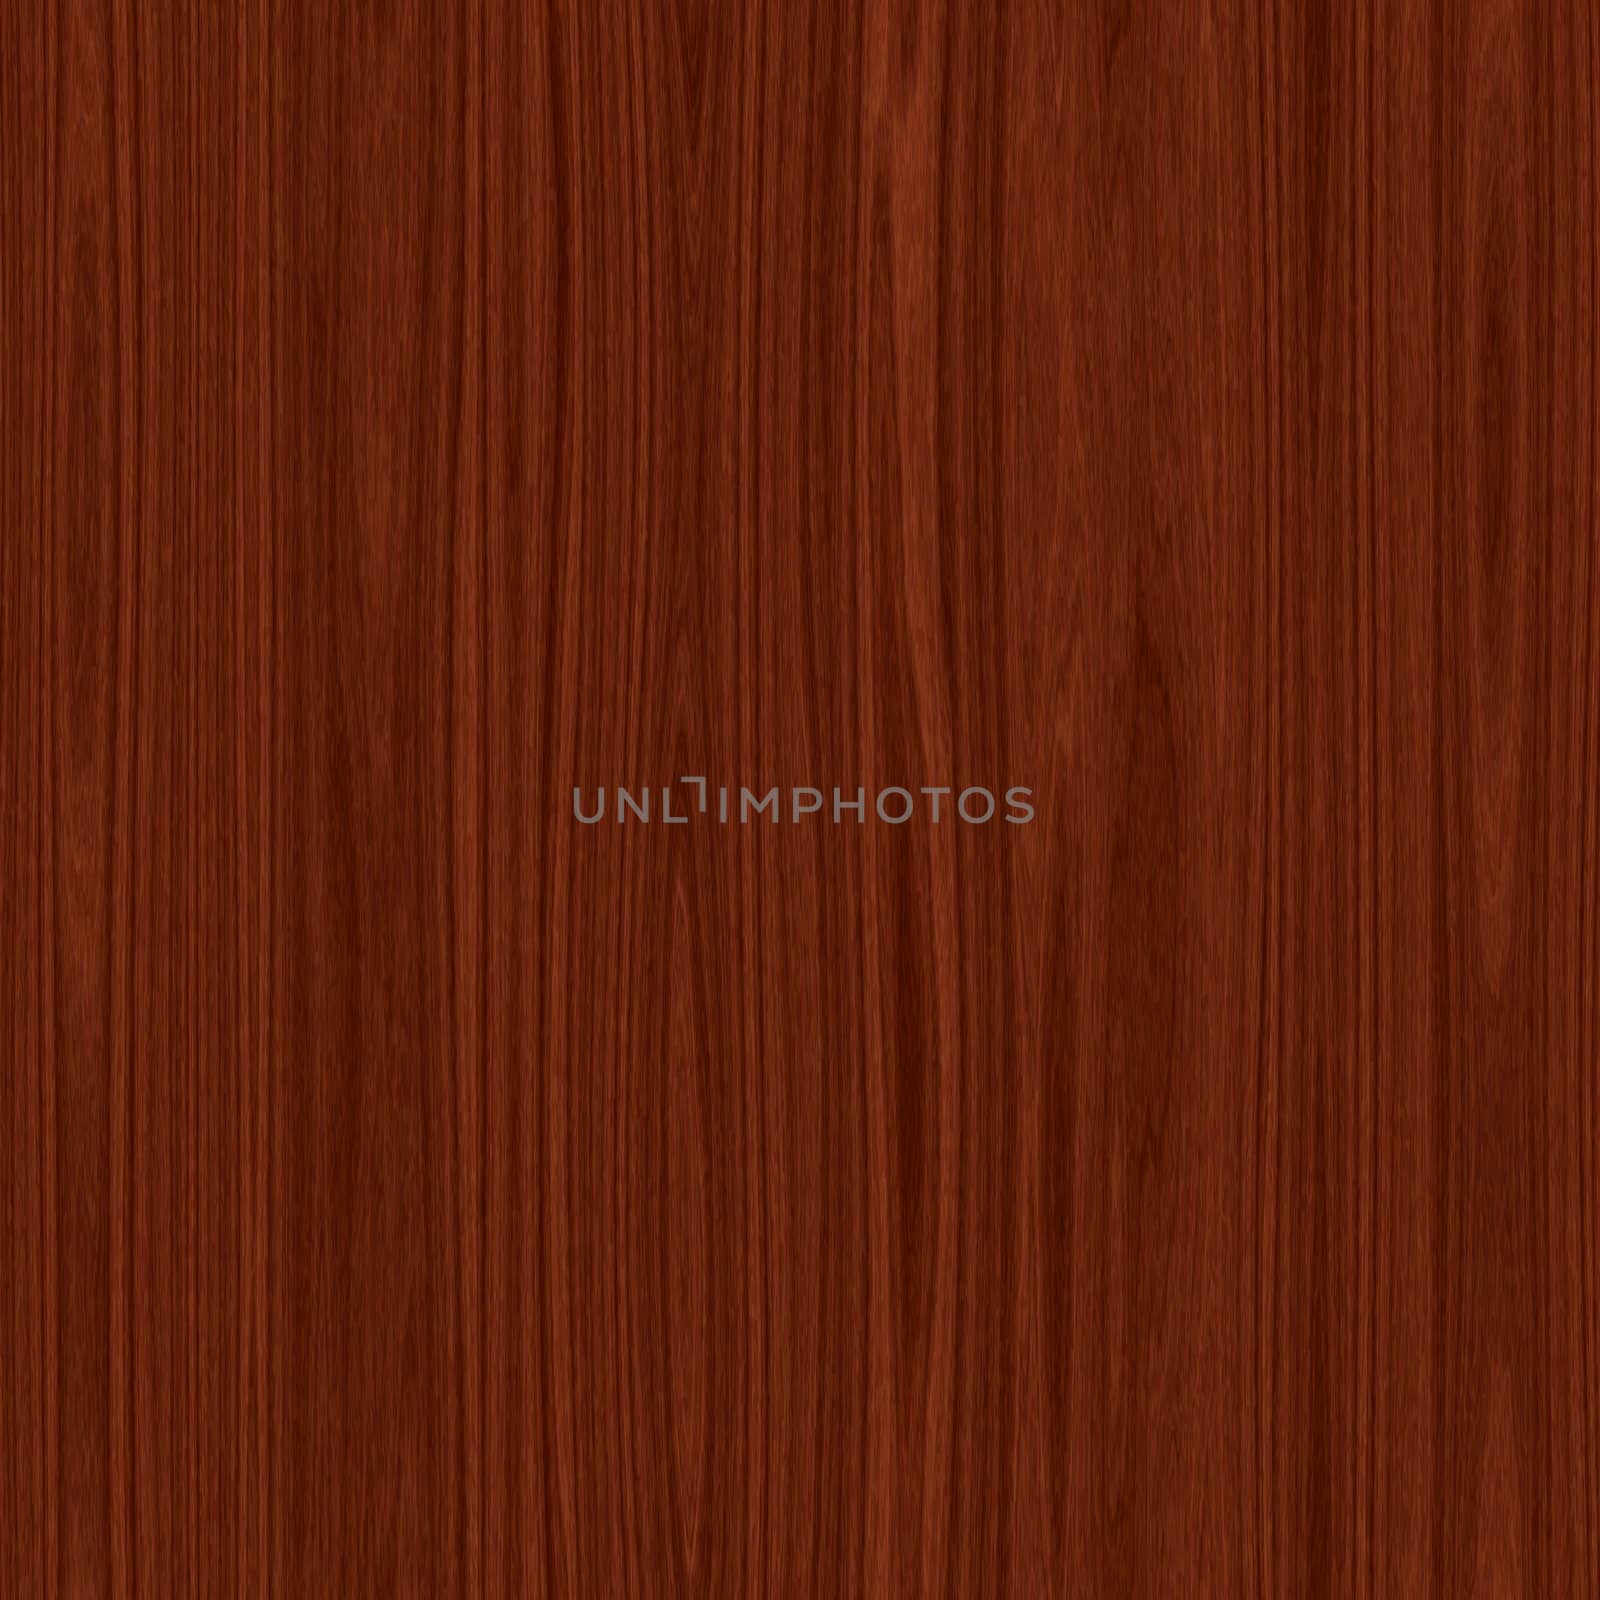 woodgrain texture background by clearviewstock